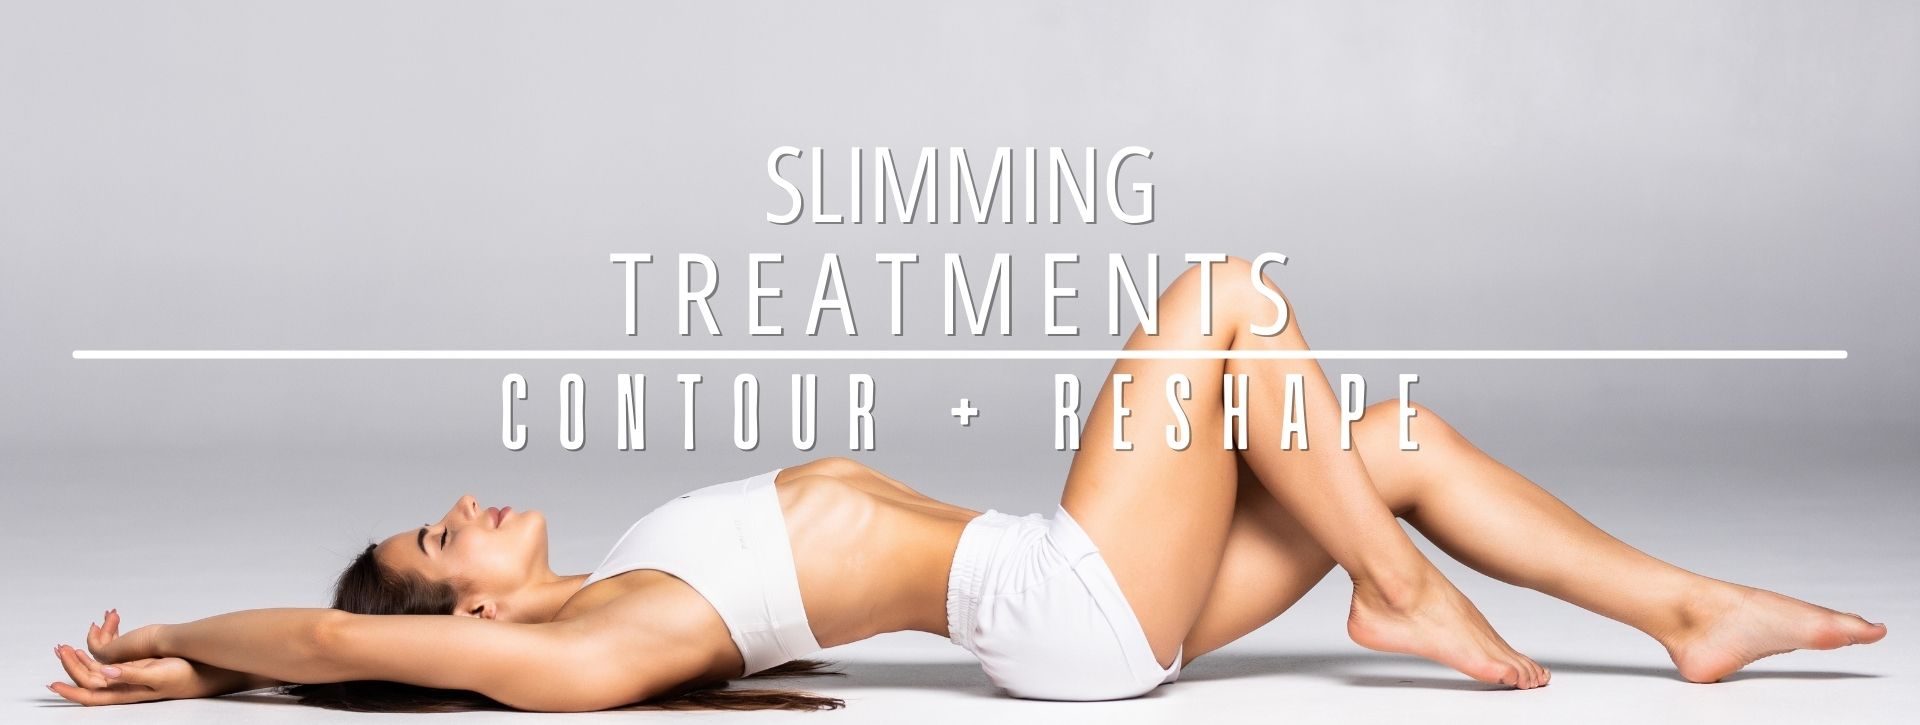 woman showing her perfect body as a result of slimming treatments promoting contour + reshape